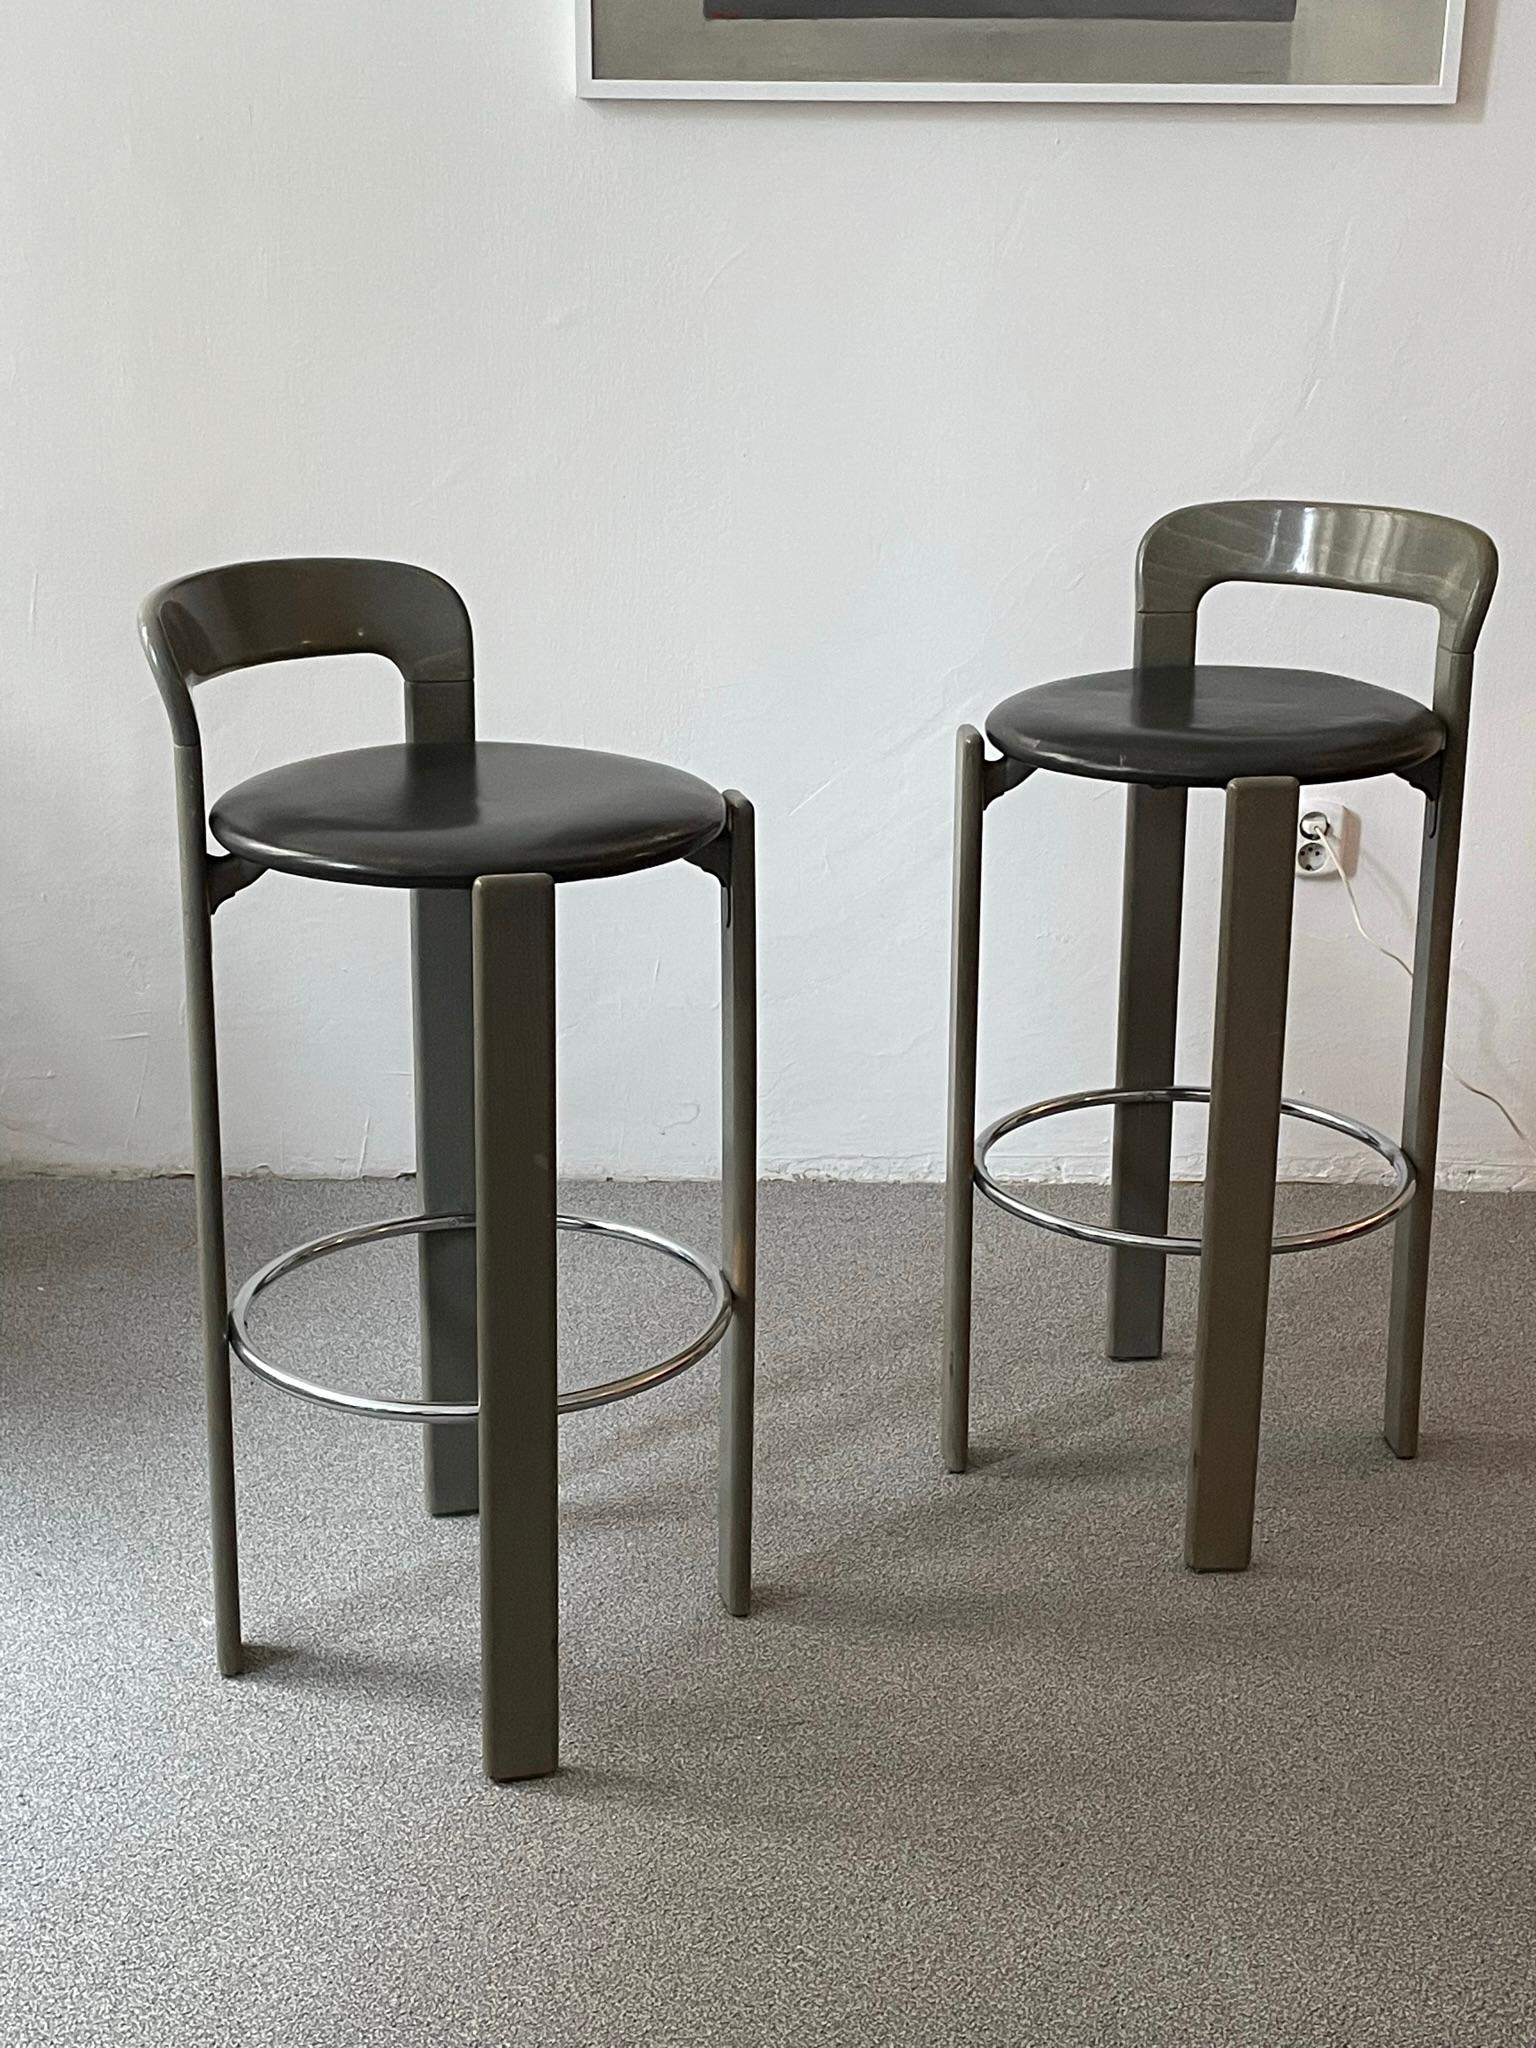 Bar stool by Bruno Rey for Dietiker.
 Made in Switzerland
The bar stool have a solid wooden frame with curved backrests . Covered in leather
 In good vintage condition, very strong and sturdy .
 Have some minor marks commensurate with age and